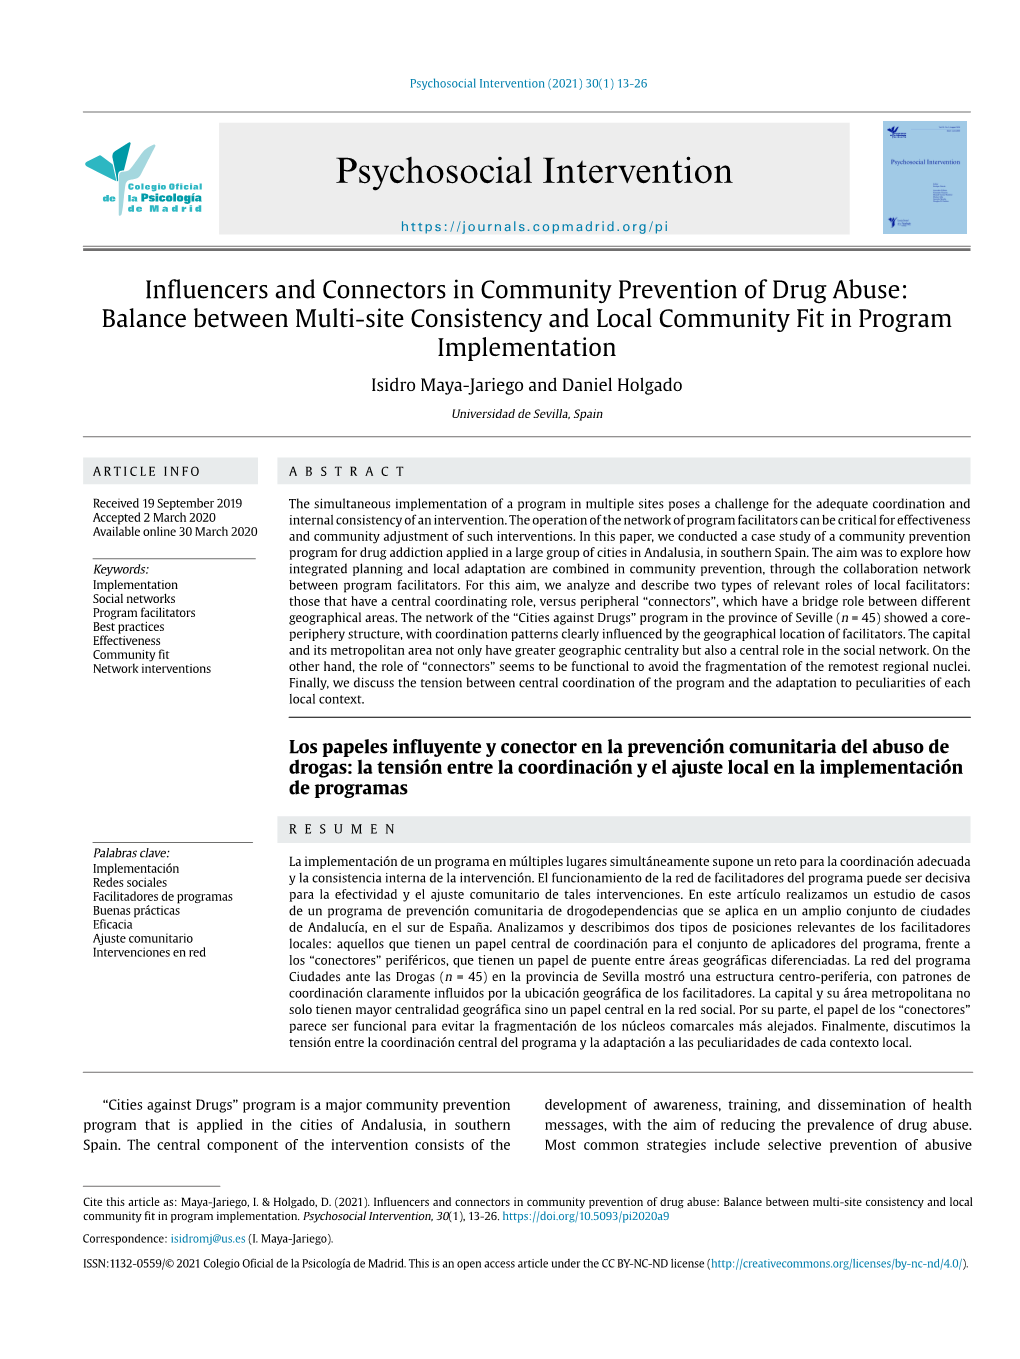 Influencers and Connectors in Community Prevention of Drug Abuse